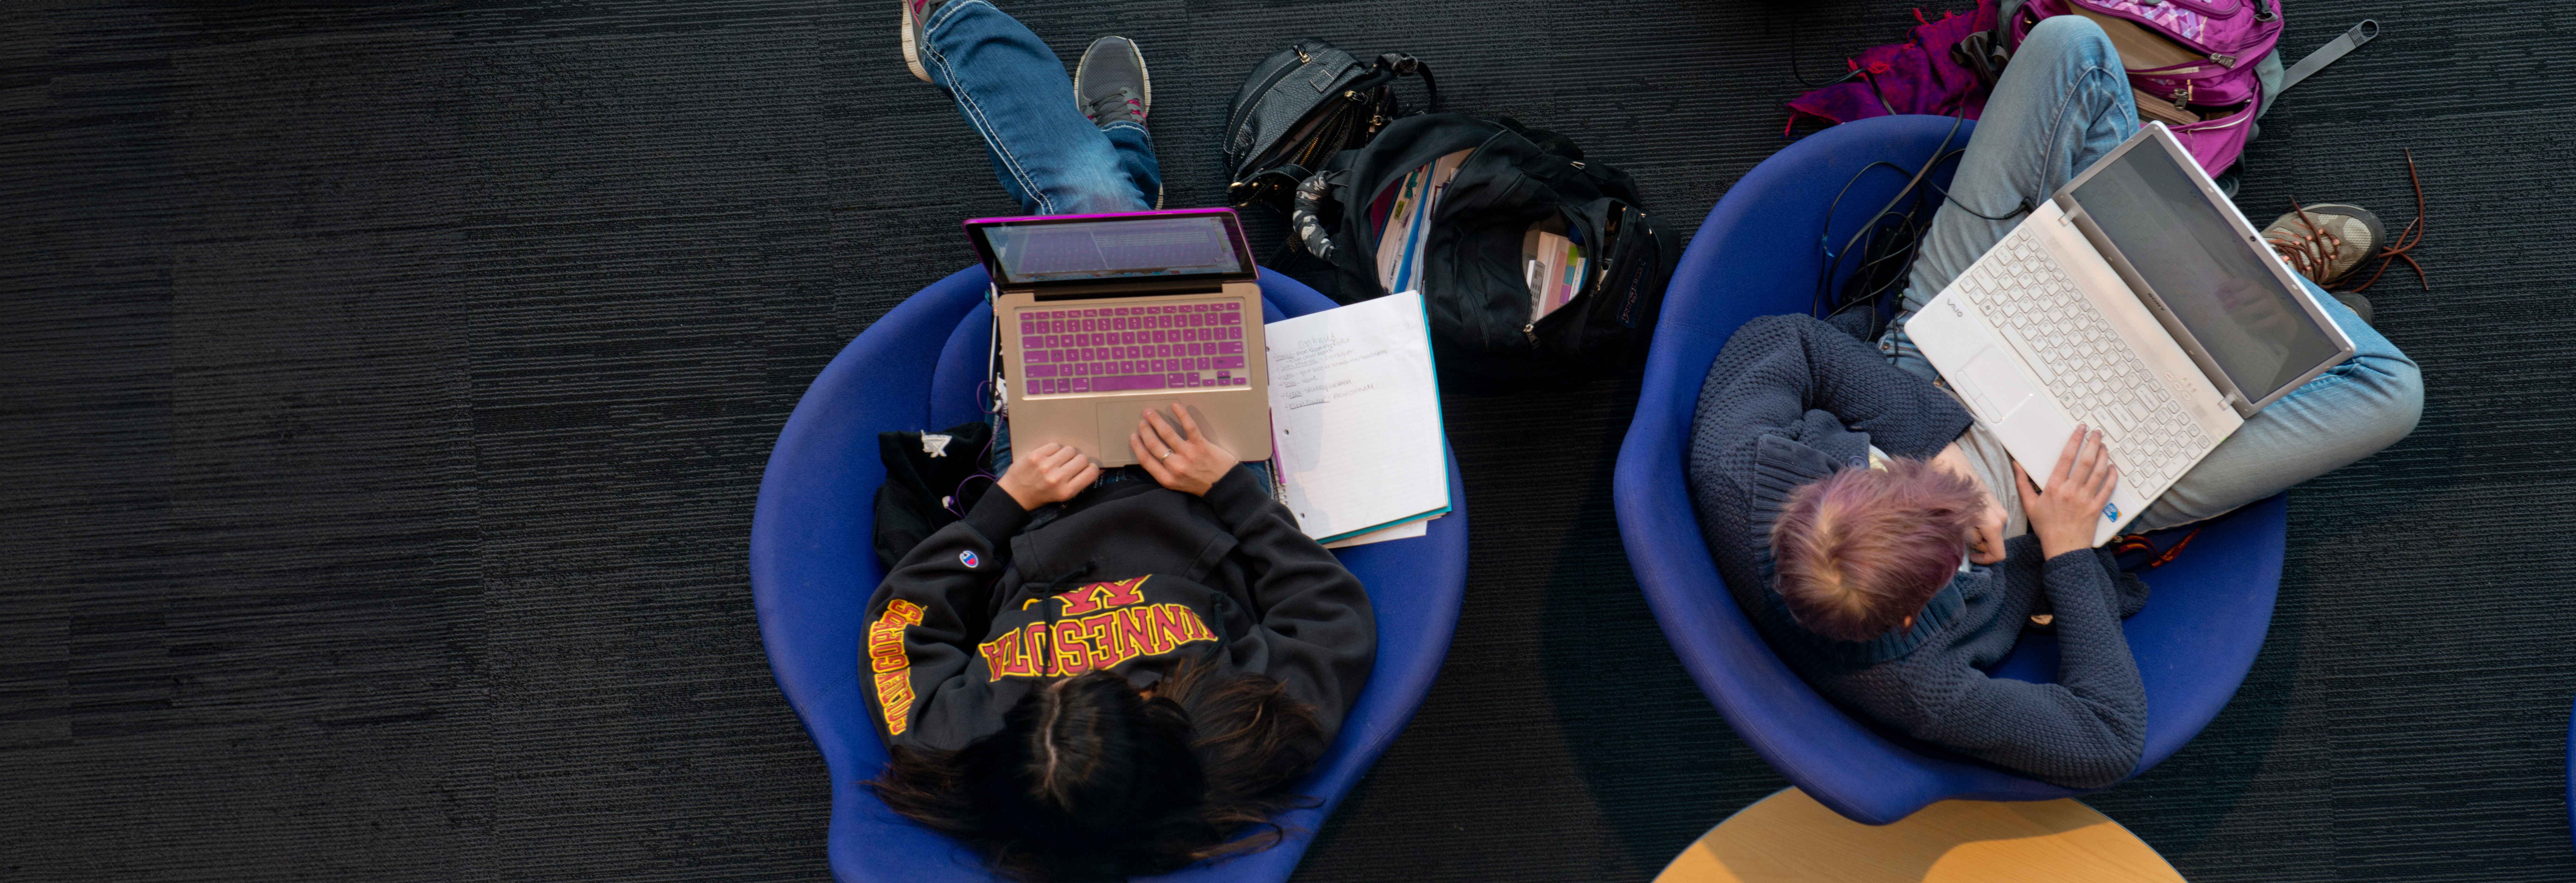 Birds-eye view of two students on computers 